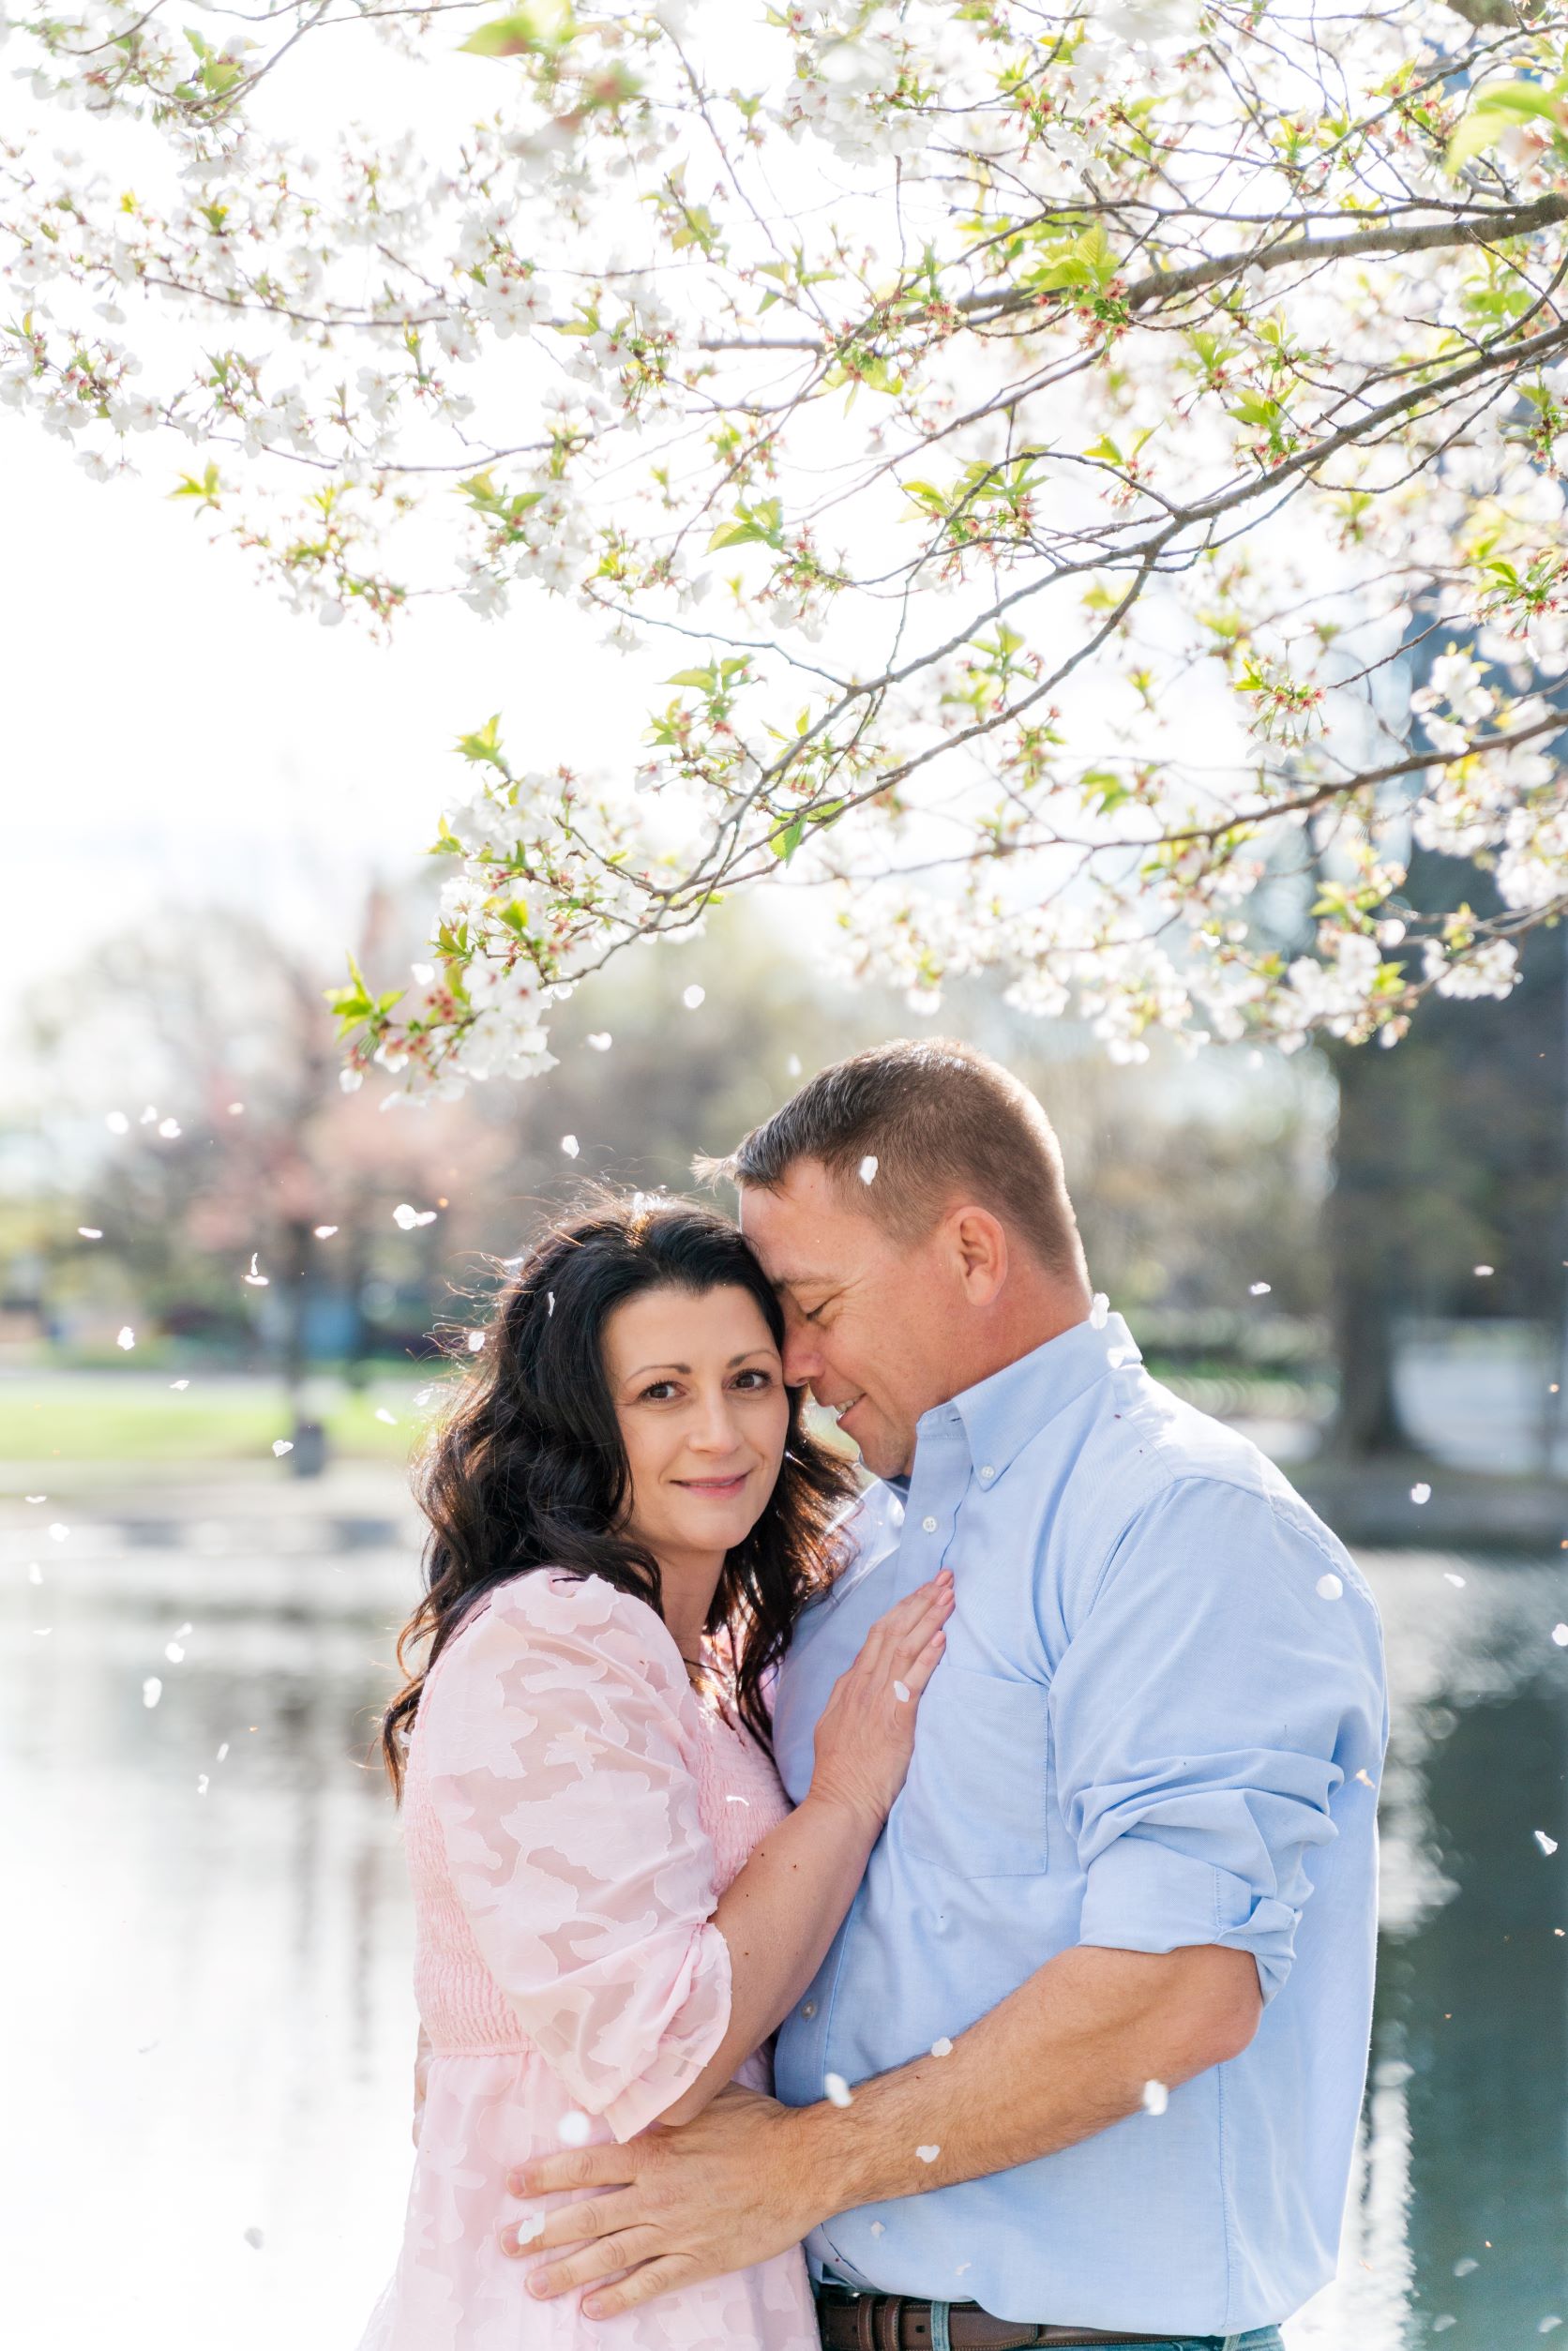 Jessica and Bryan snuggle under a beautiful cherry blossom tree as petals fall all around them.